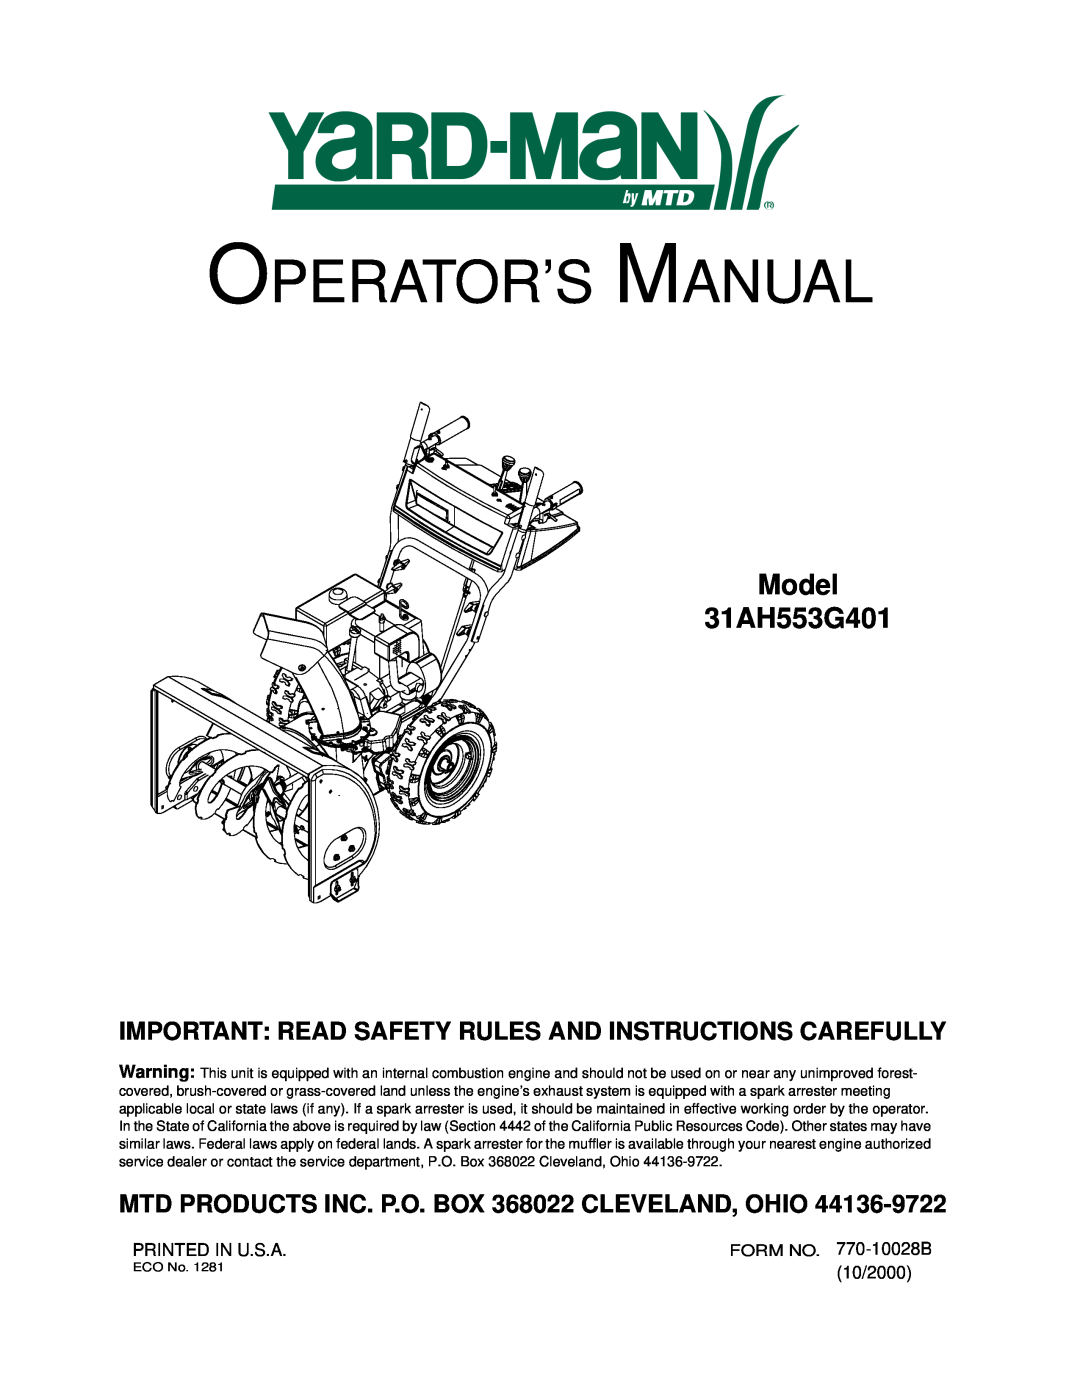 Yard-Man manual Operator’S Manual, Model 31AH553G401, Important Read Safety Rules And Instructions Carefully 